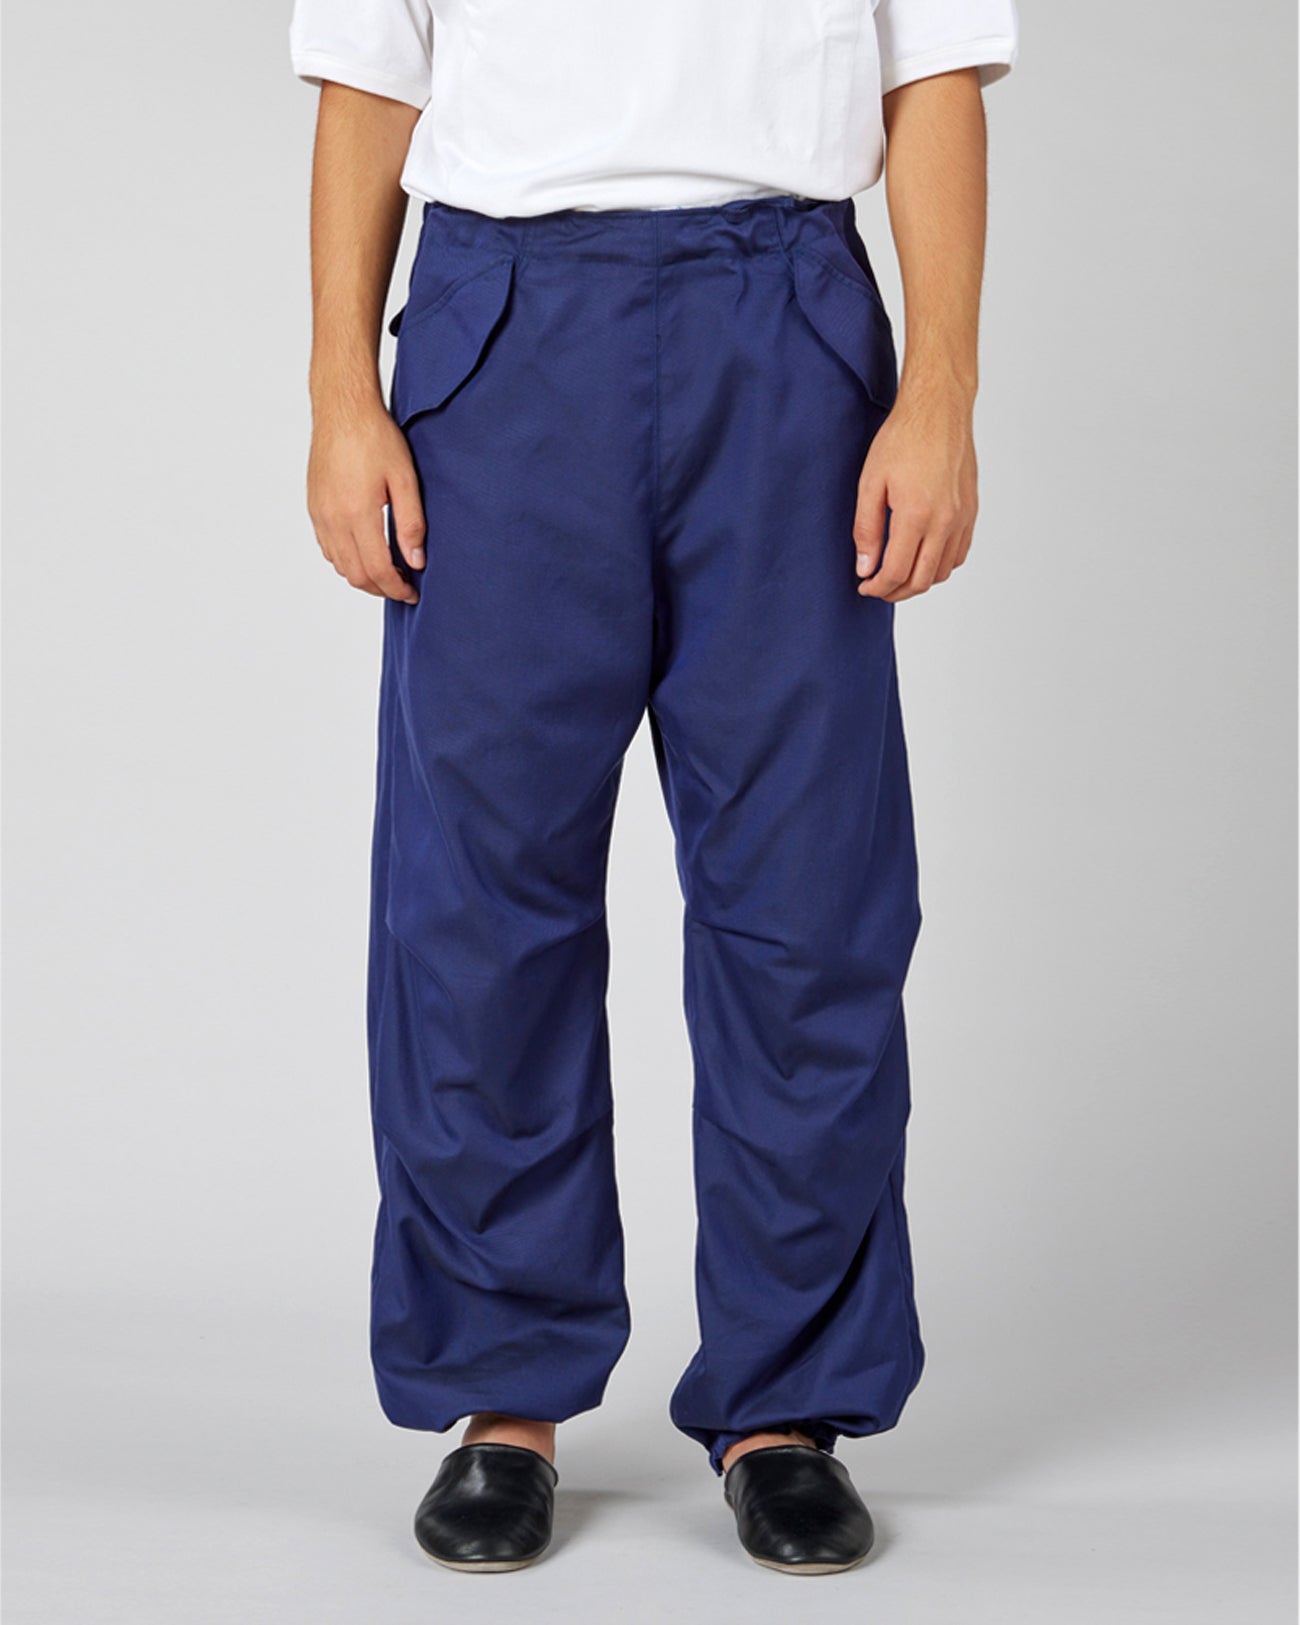 Finx OX New M65 Trousers - navy